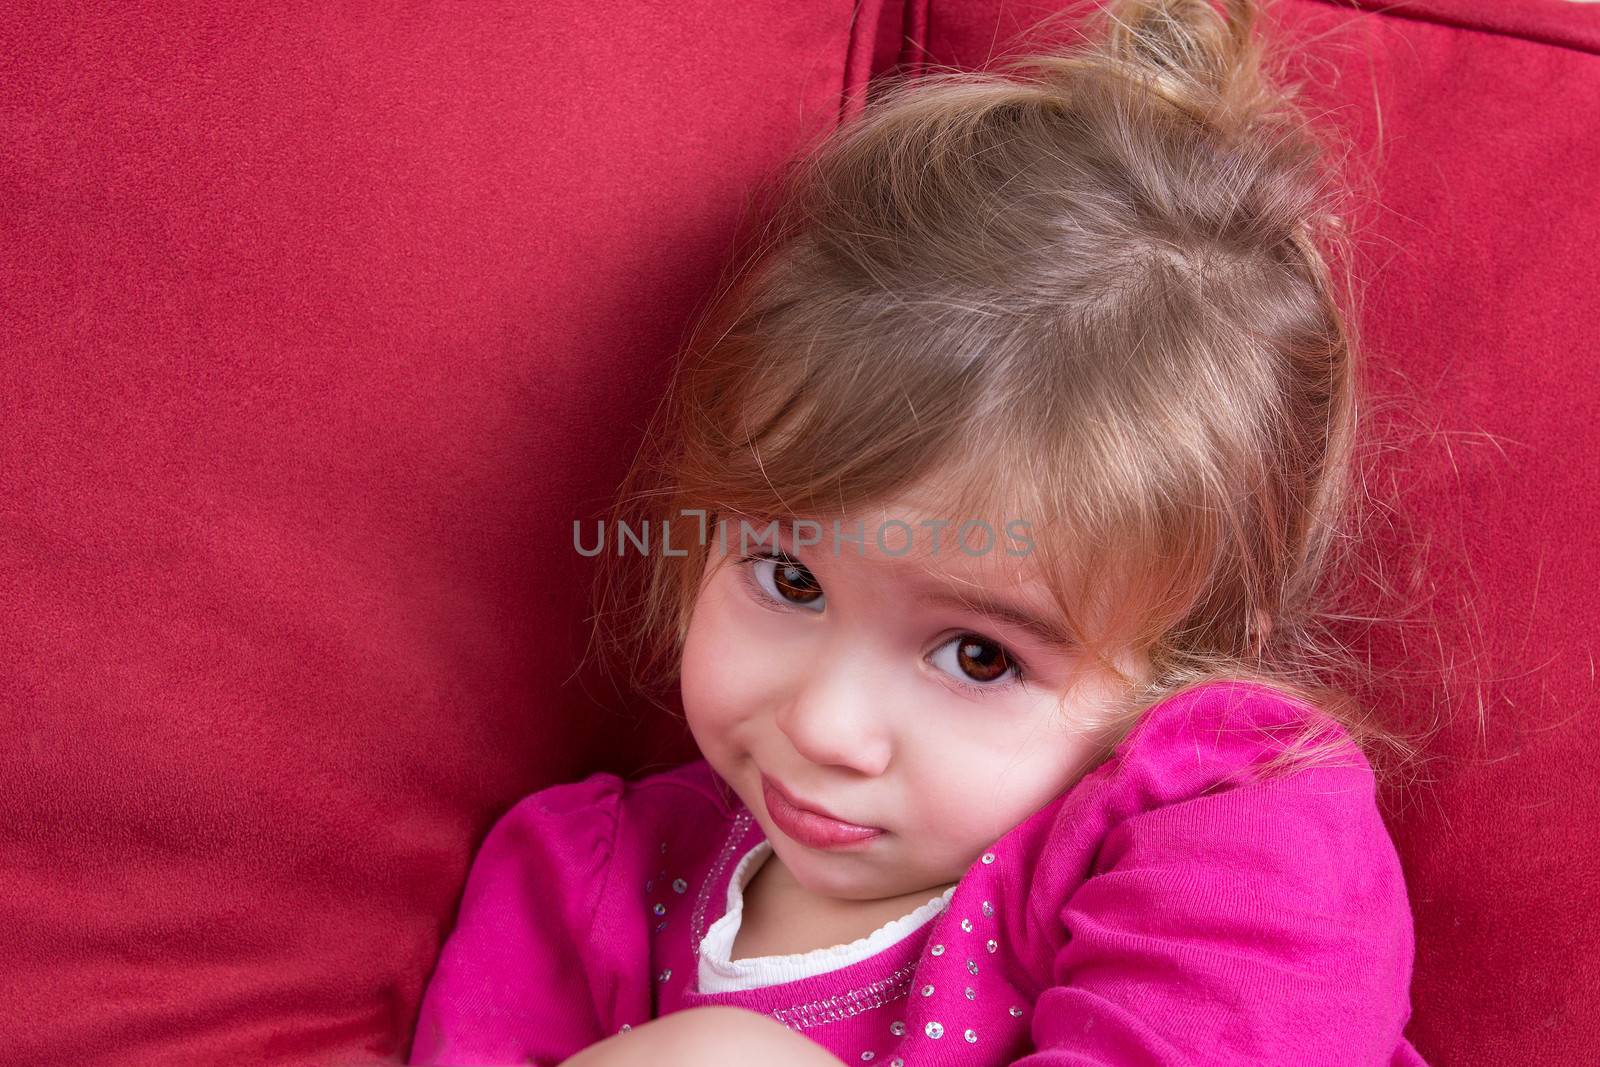 Shy little girl looking at the camera with big eyes as she snuggles down in a comfortable armchair